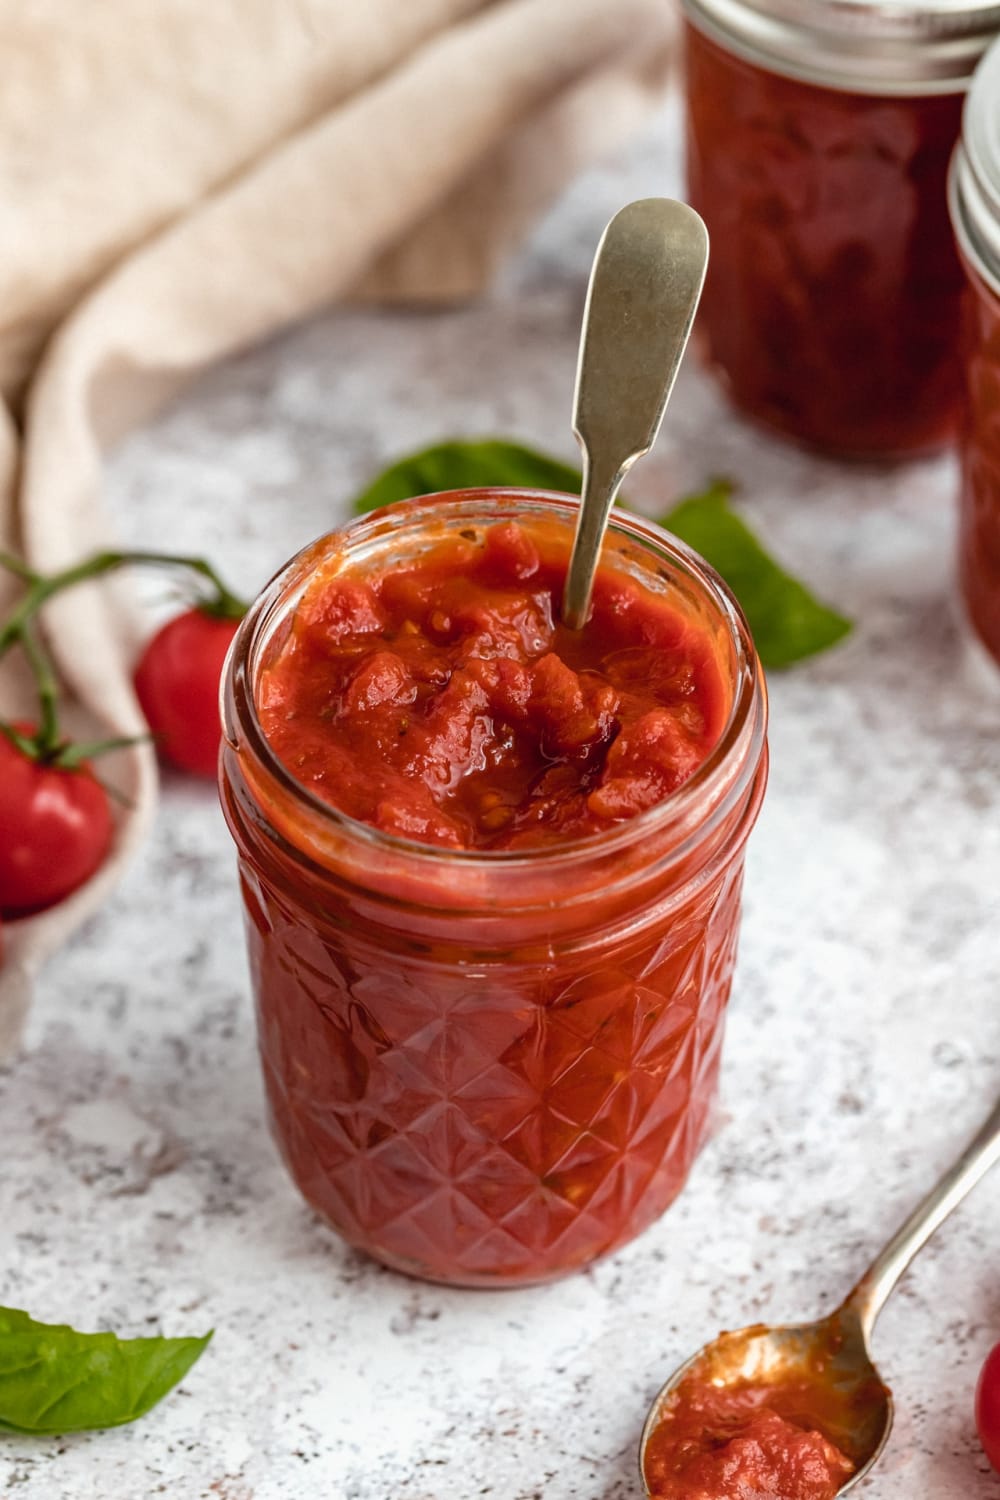 This homemade marinara sauce recipe is incredibly flavorful.